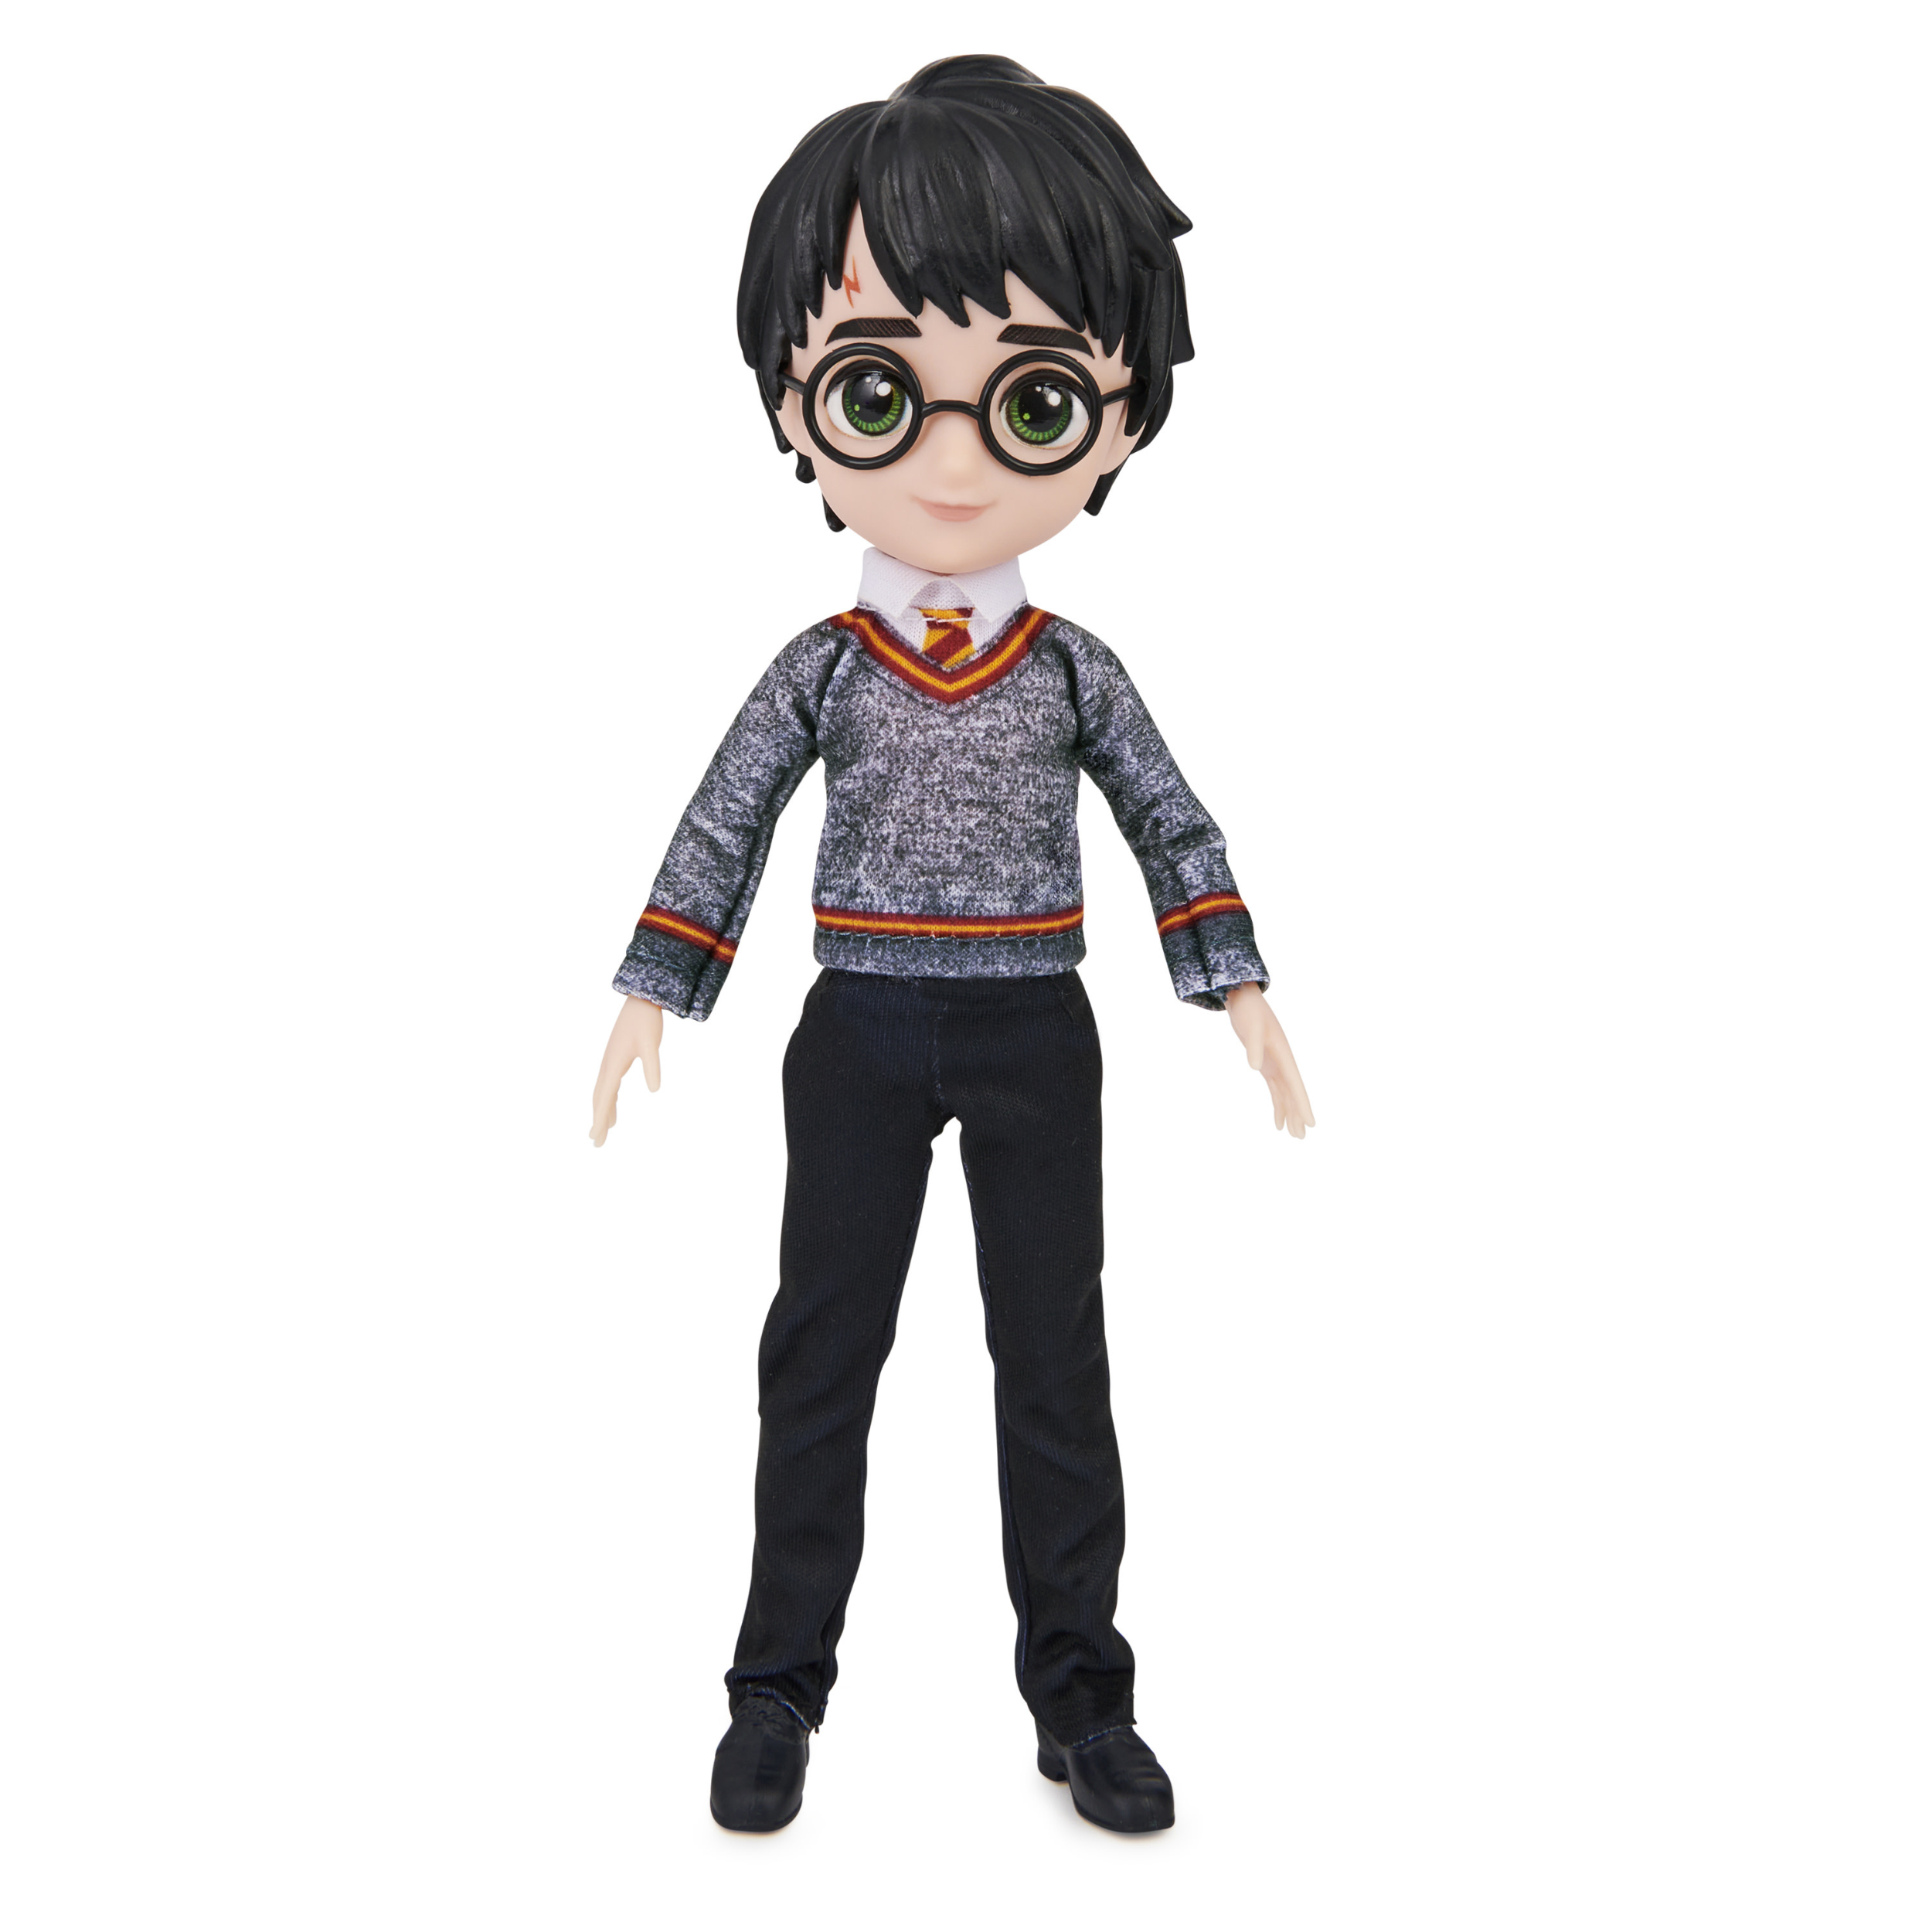 SPIN MASTER - Wizarding World Harry Potter, 8-inch Harry Potter Doll, Kids Toys for Ages 5 and up